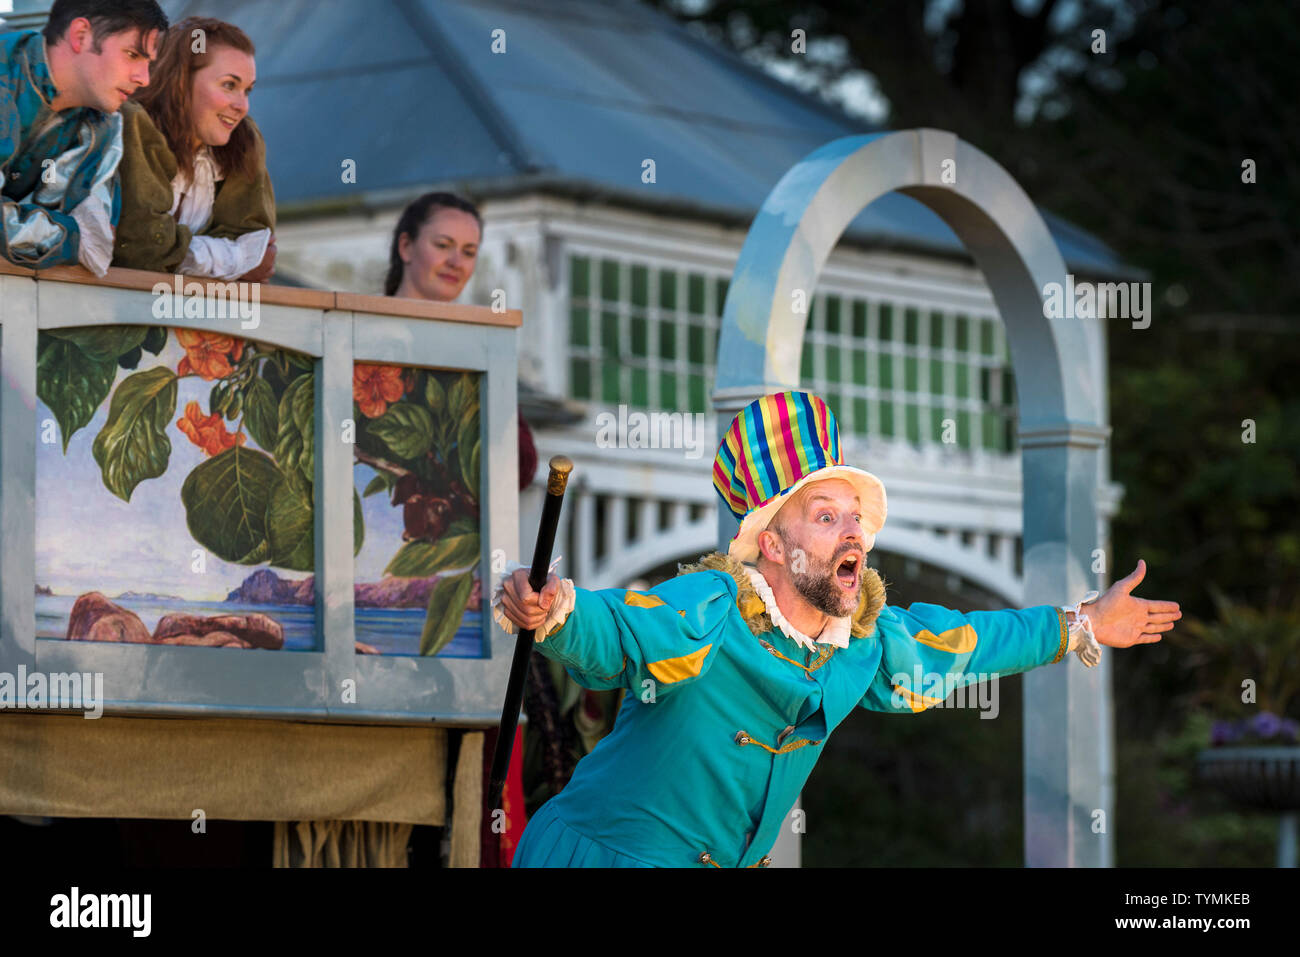 Actor David Sayers performing in an outdoor theatre production of The Tempest by Illyria Theatre in Falmouth in Cornwall. Stock Photo